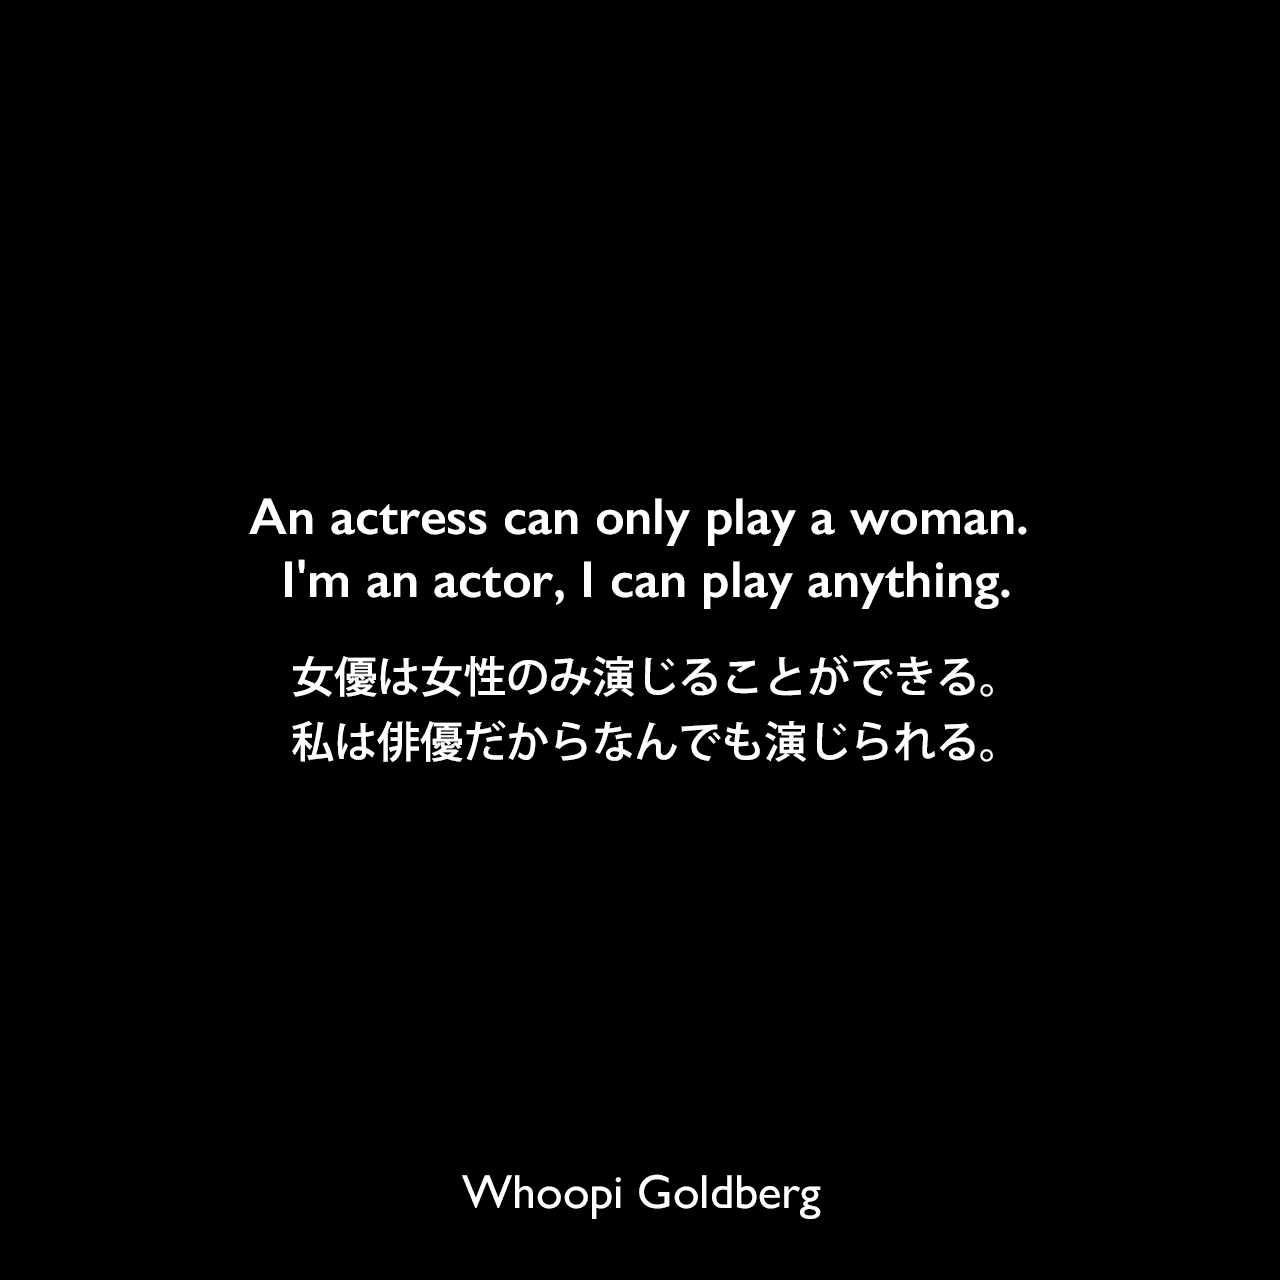 An actress can only play a woman. I'm an actor, I can play anything.女優は女性のみ演じることができる。私は俳優だからなんでも演じられる。Whoopi Goldberg